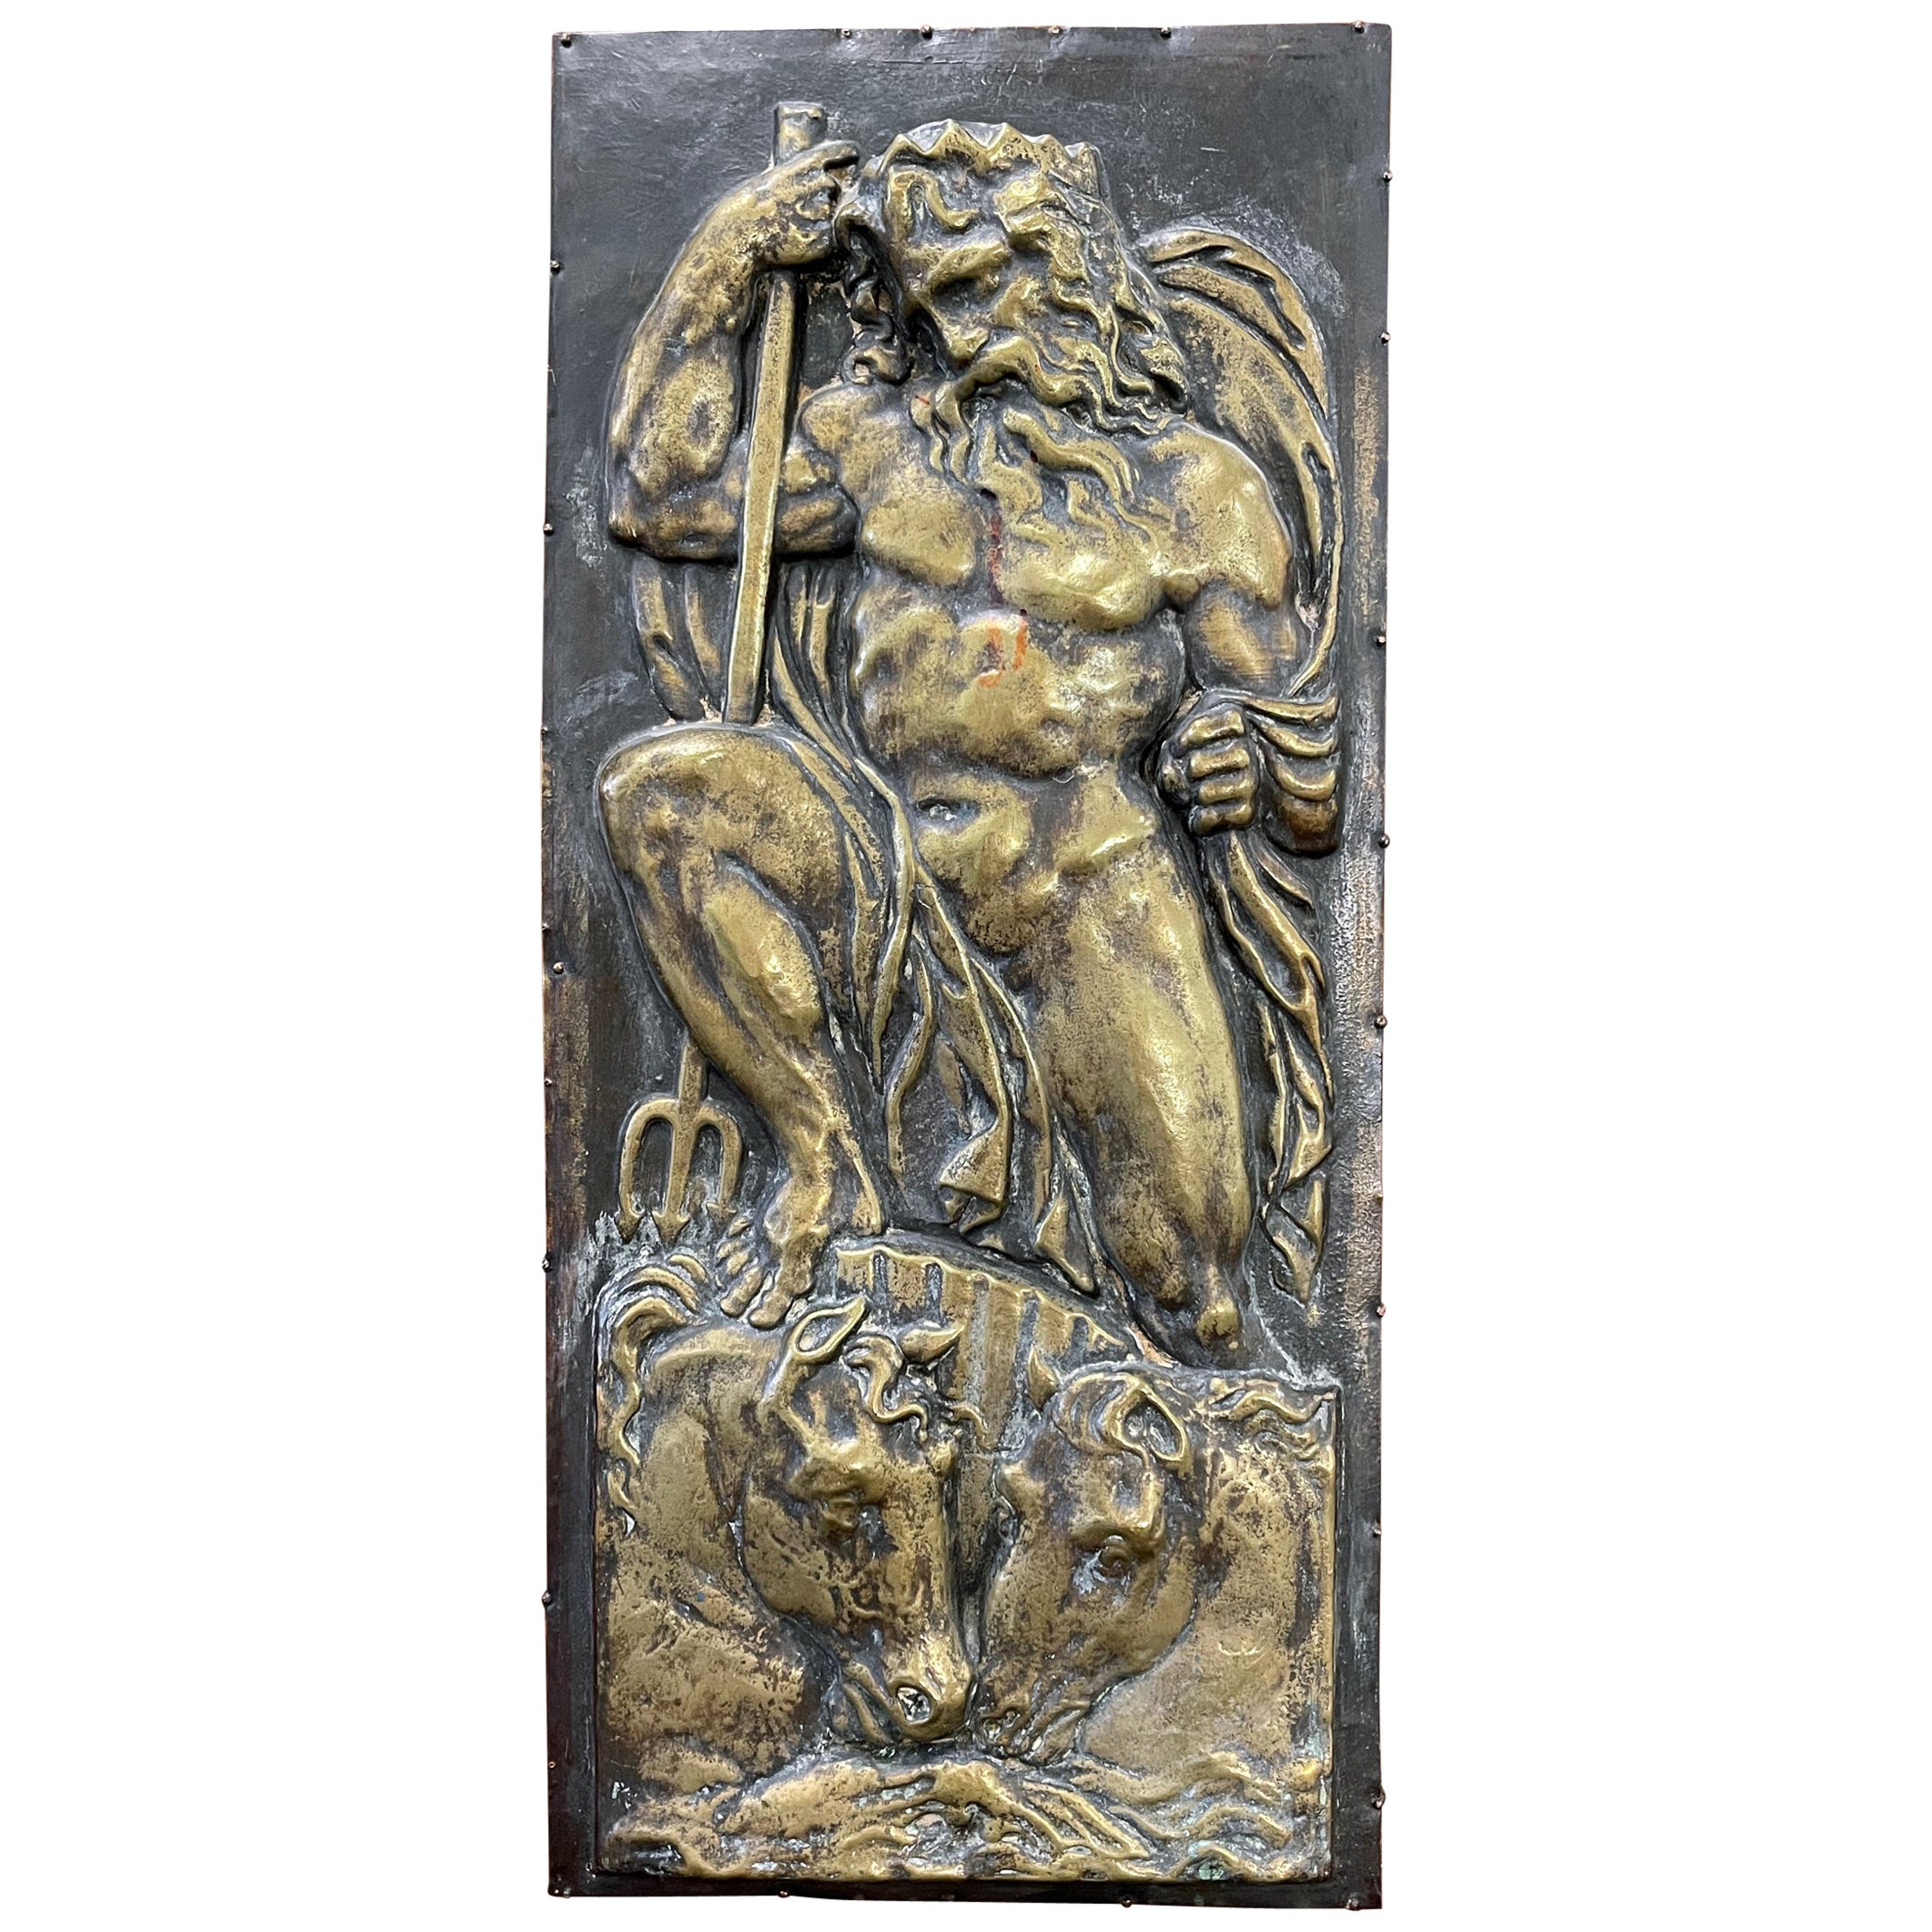 "Poseidon and Vulcan, " Marvelous Brass Repoussé Relief Sculptures, Nude Males For Sale